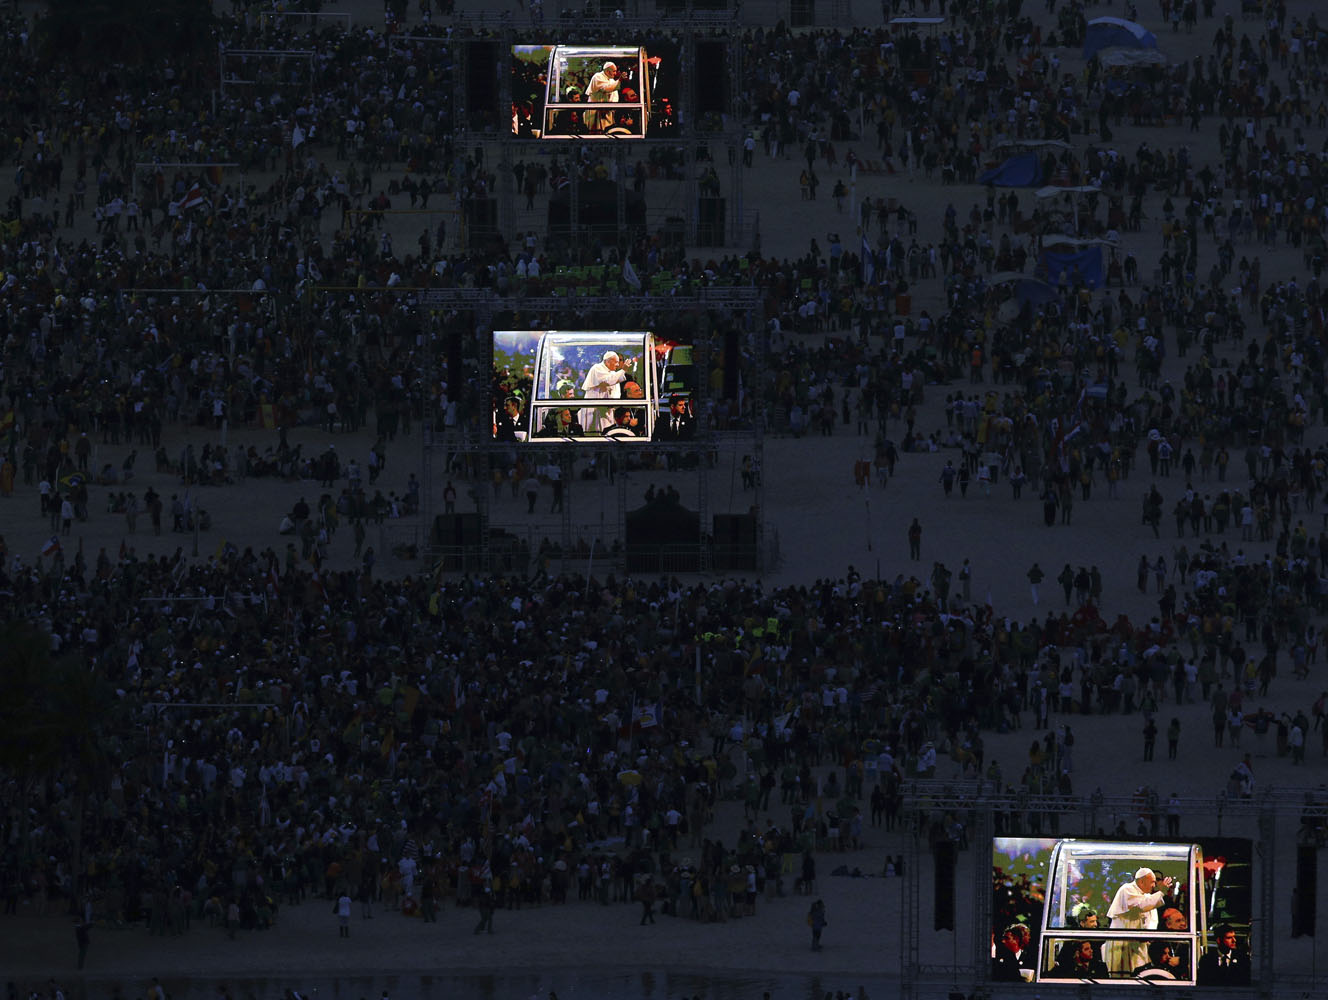 Pope Francis is projected on screens at Copacabana beach in Rio de Janeiro